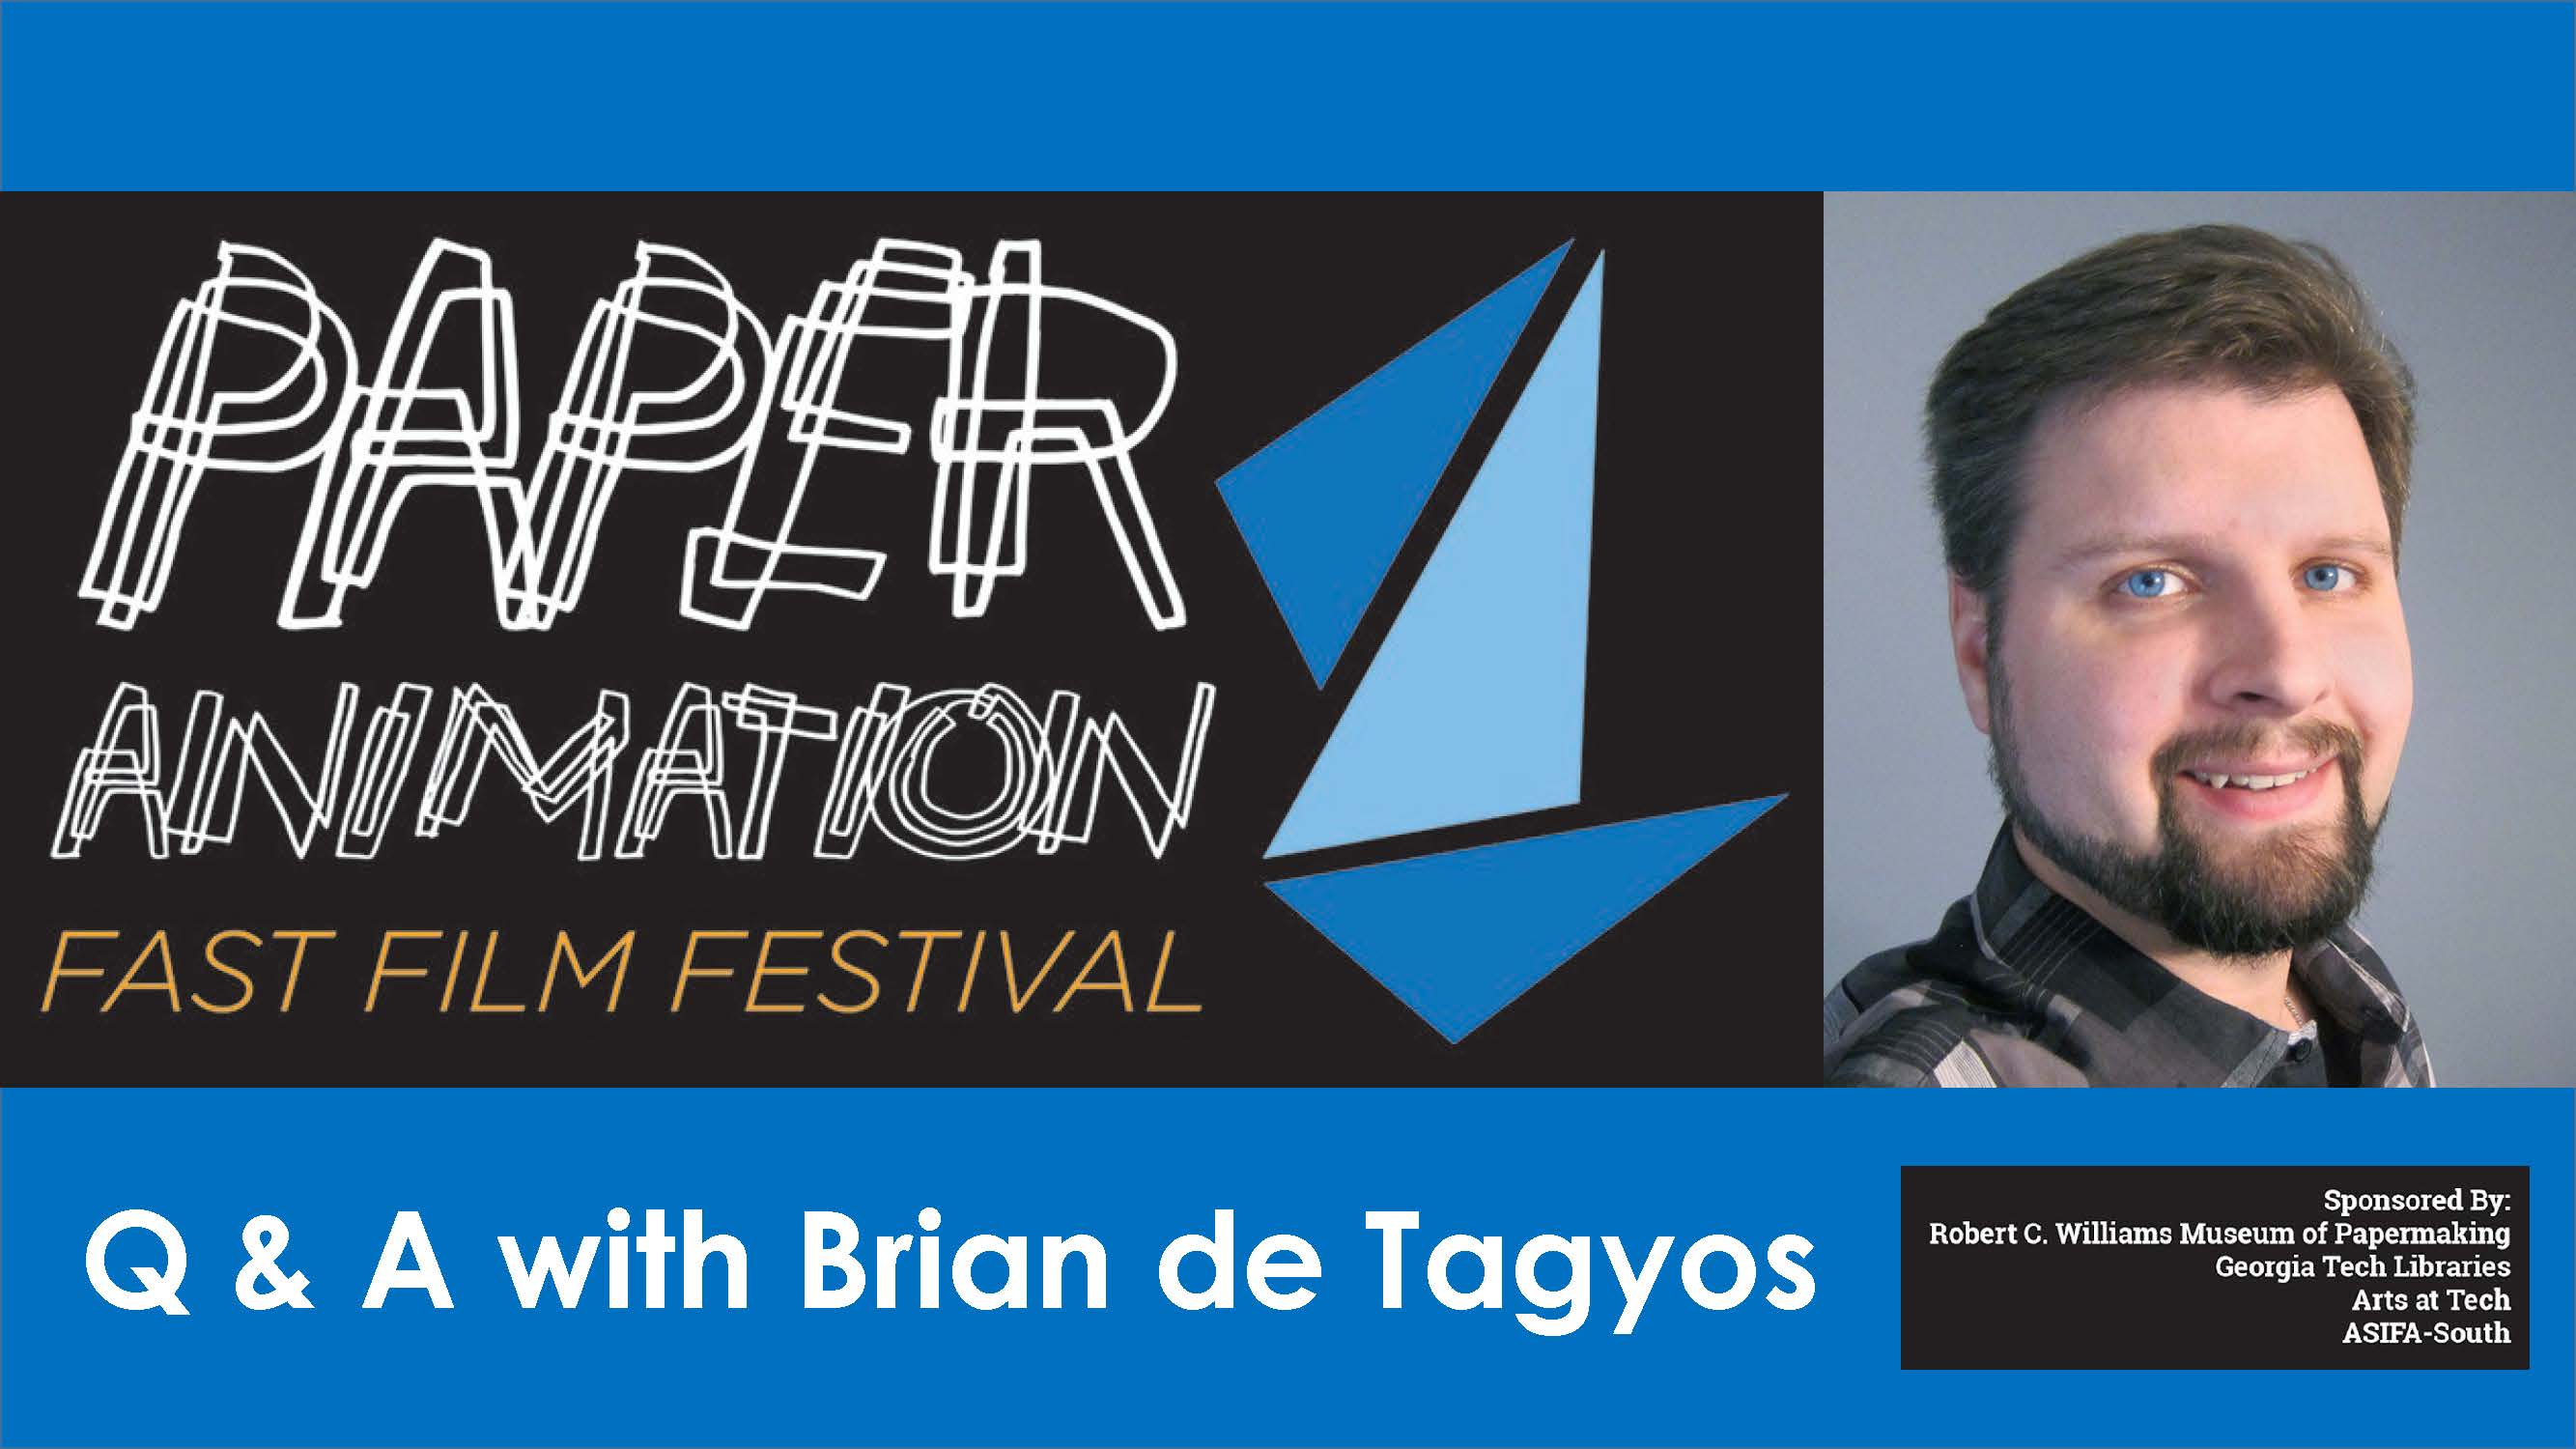 Title image for Q & A with Brian de Tagyos shows the Fast Film Fest logo which is a series of thin white overlapping lines that spell out Paper Animation to the left of 3 triangles that hint at an abstract origami form. To the right of the logo are two headshots of Brian de Tagyos. He is a Caucasian male with brown hair and blue eyes.